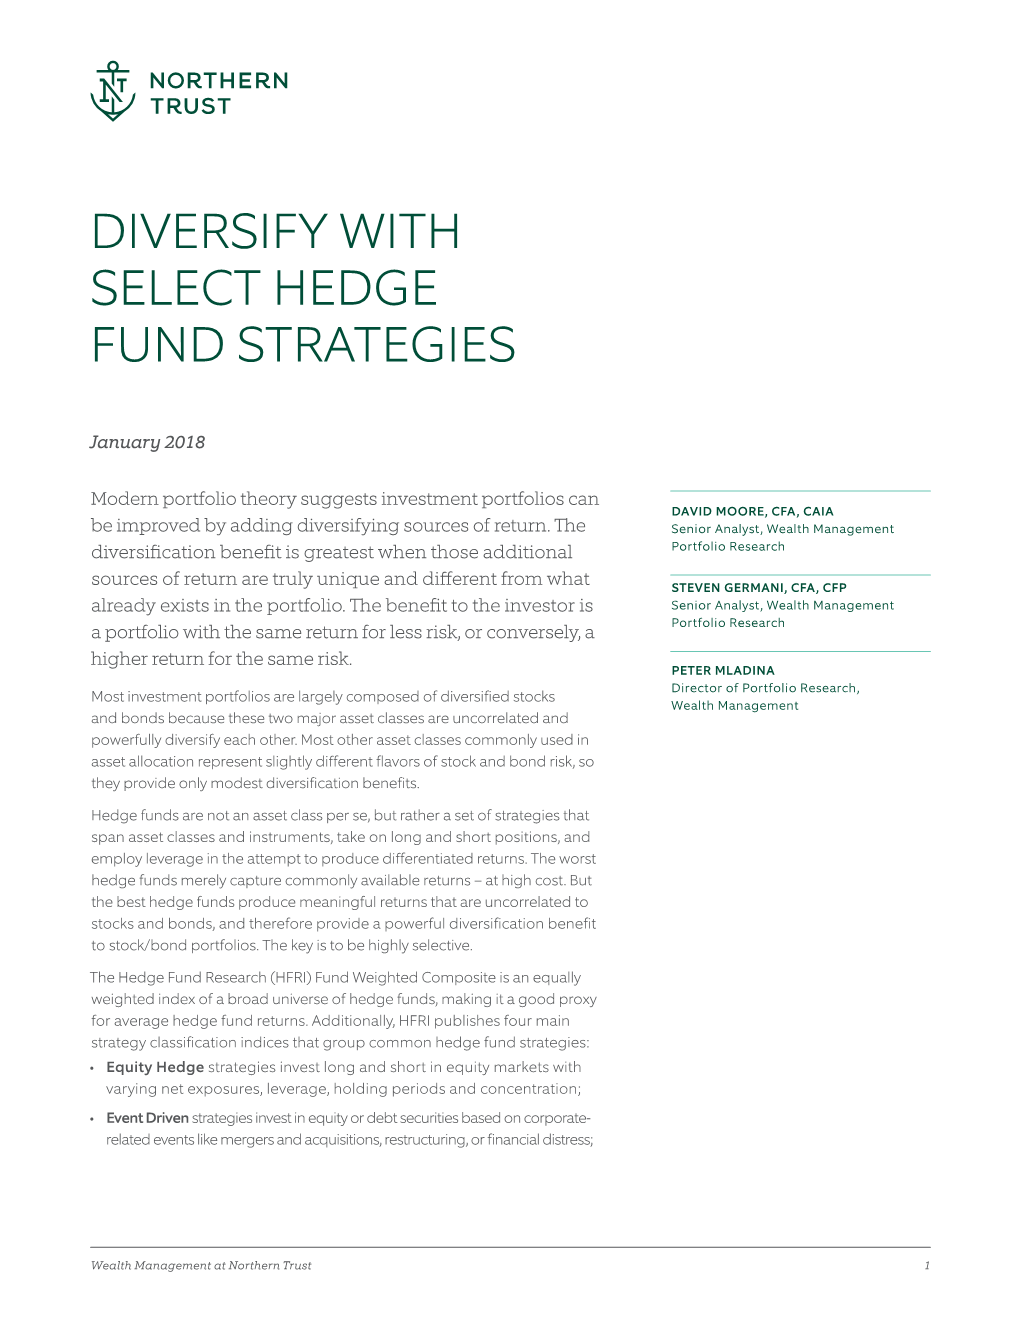 Diversify with Select Hedge Fund Strategies